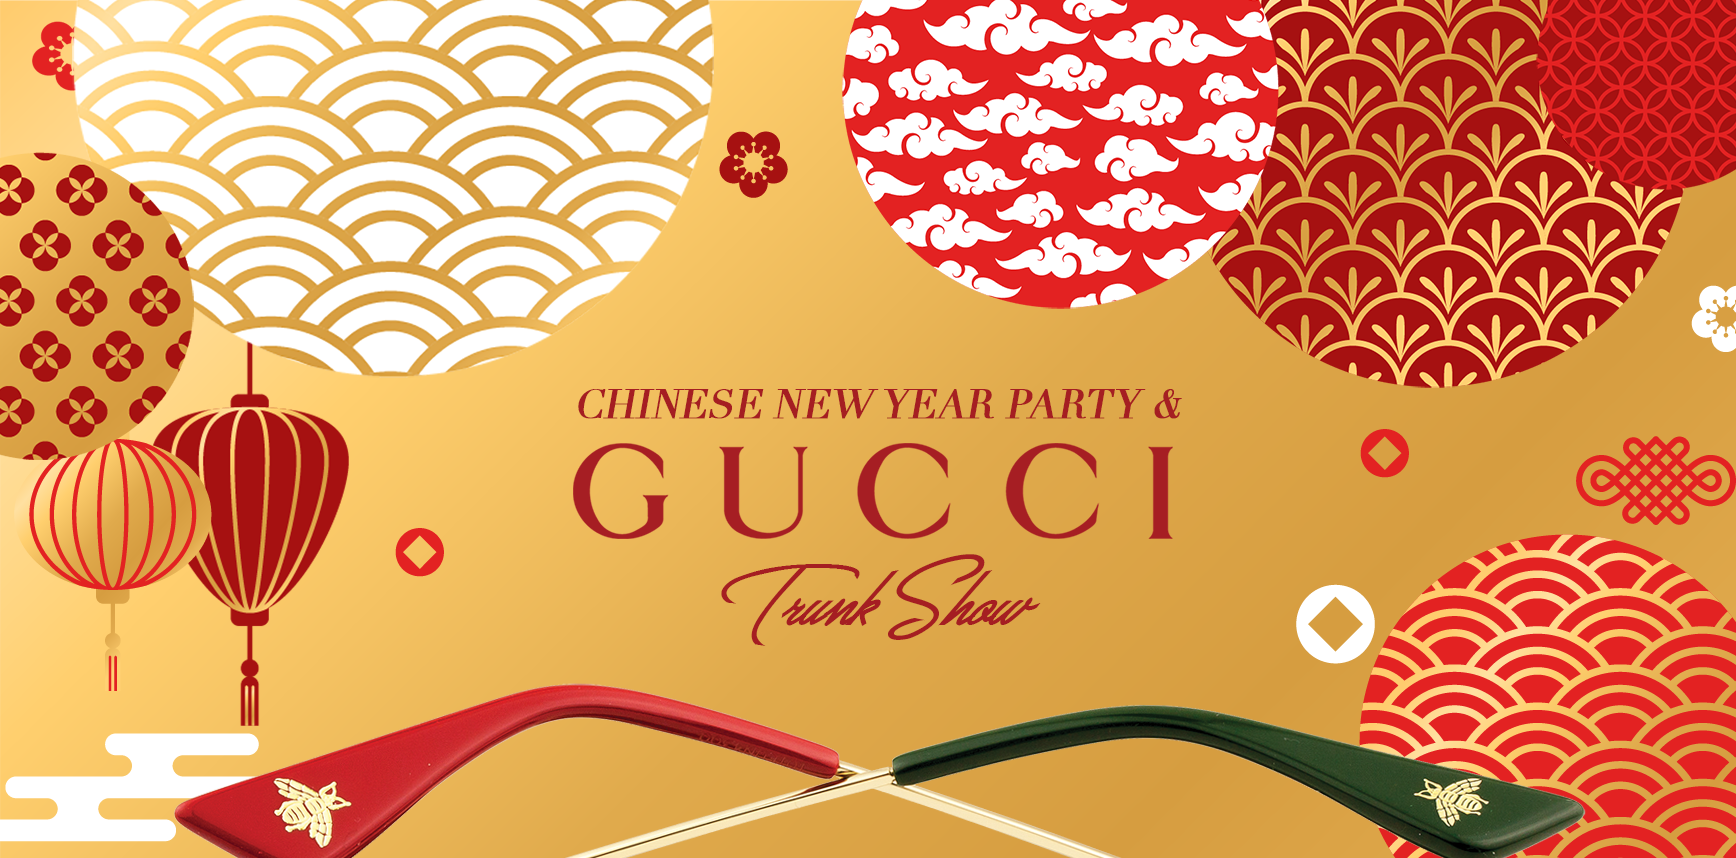 Chinese Year Party & Gucci Show | Mott